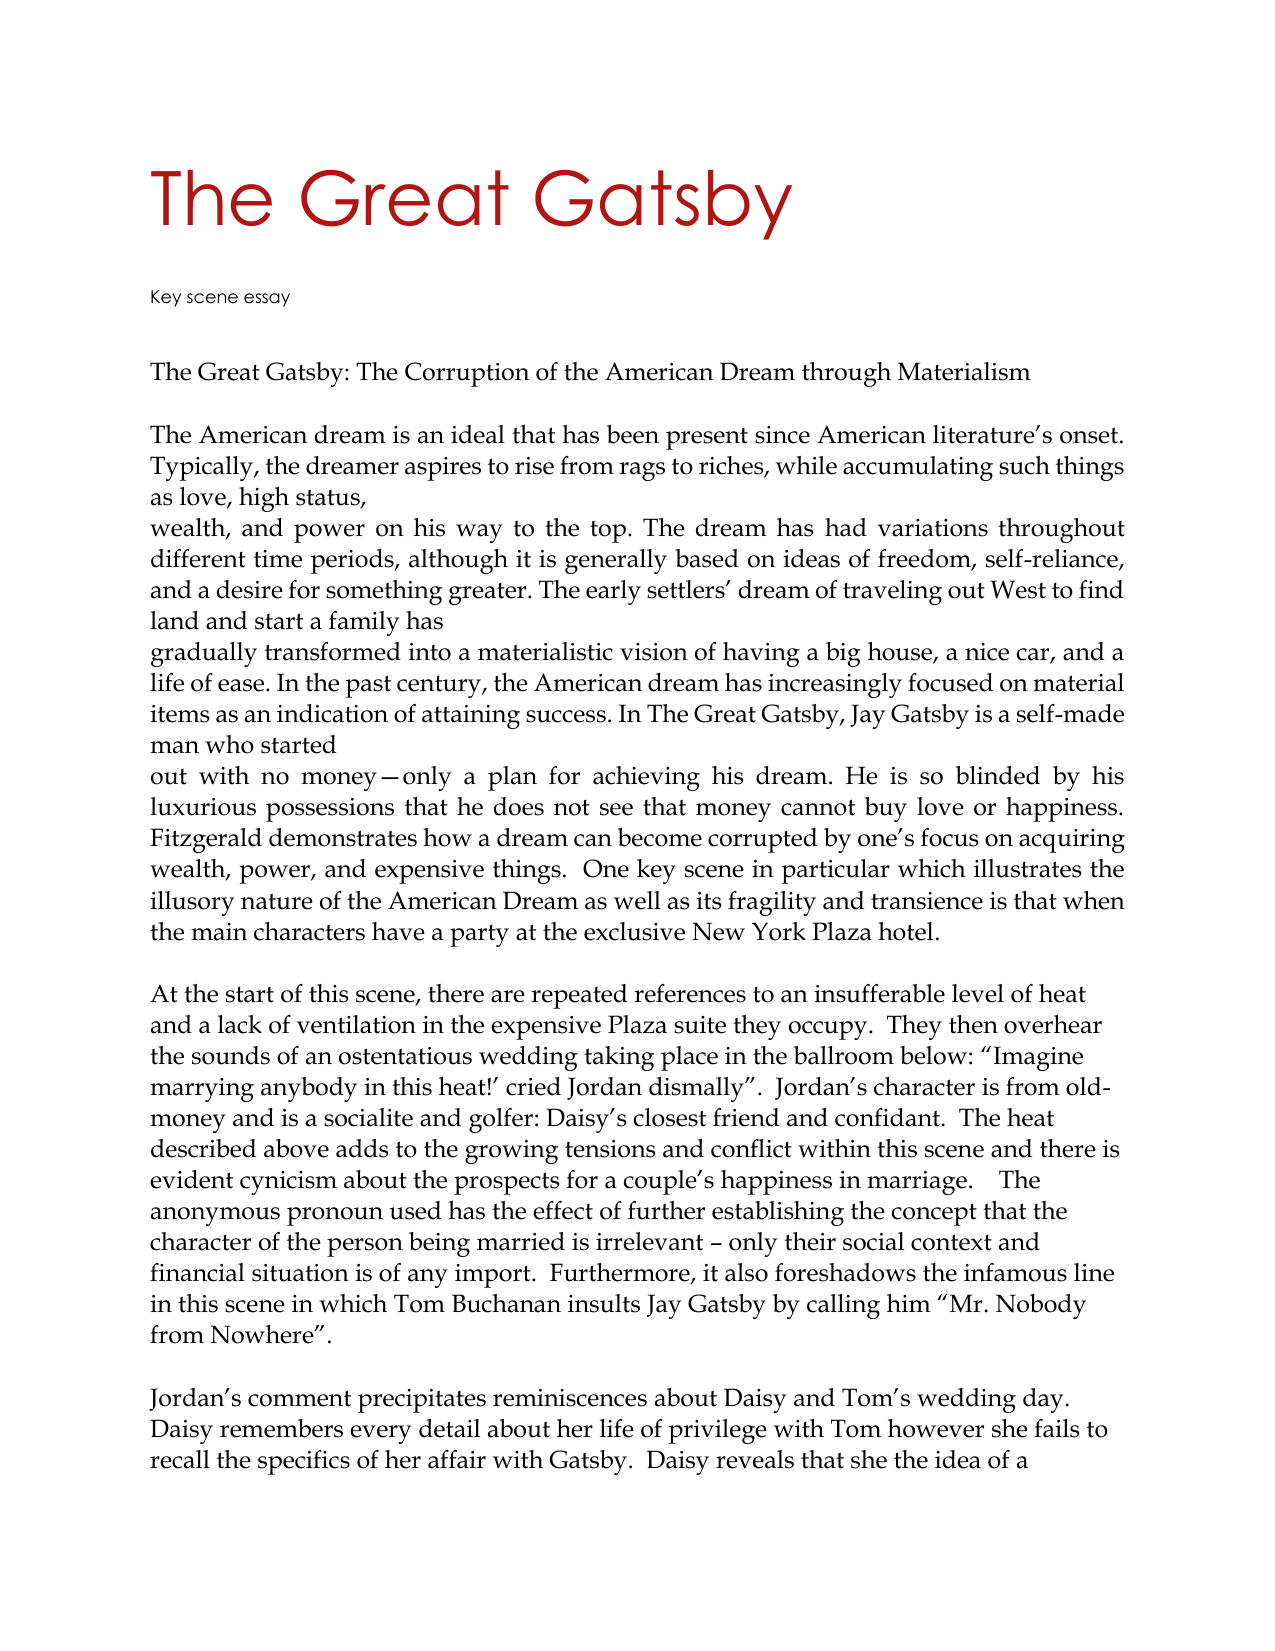 thesis for great gatsby